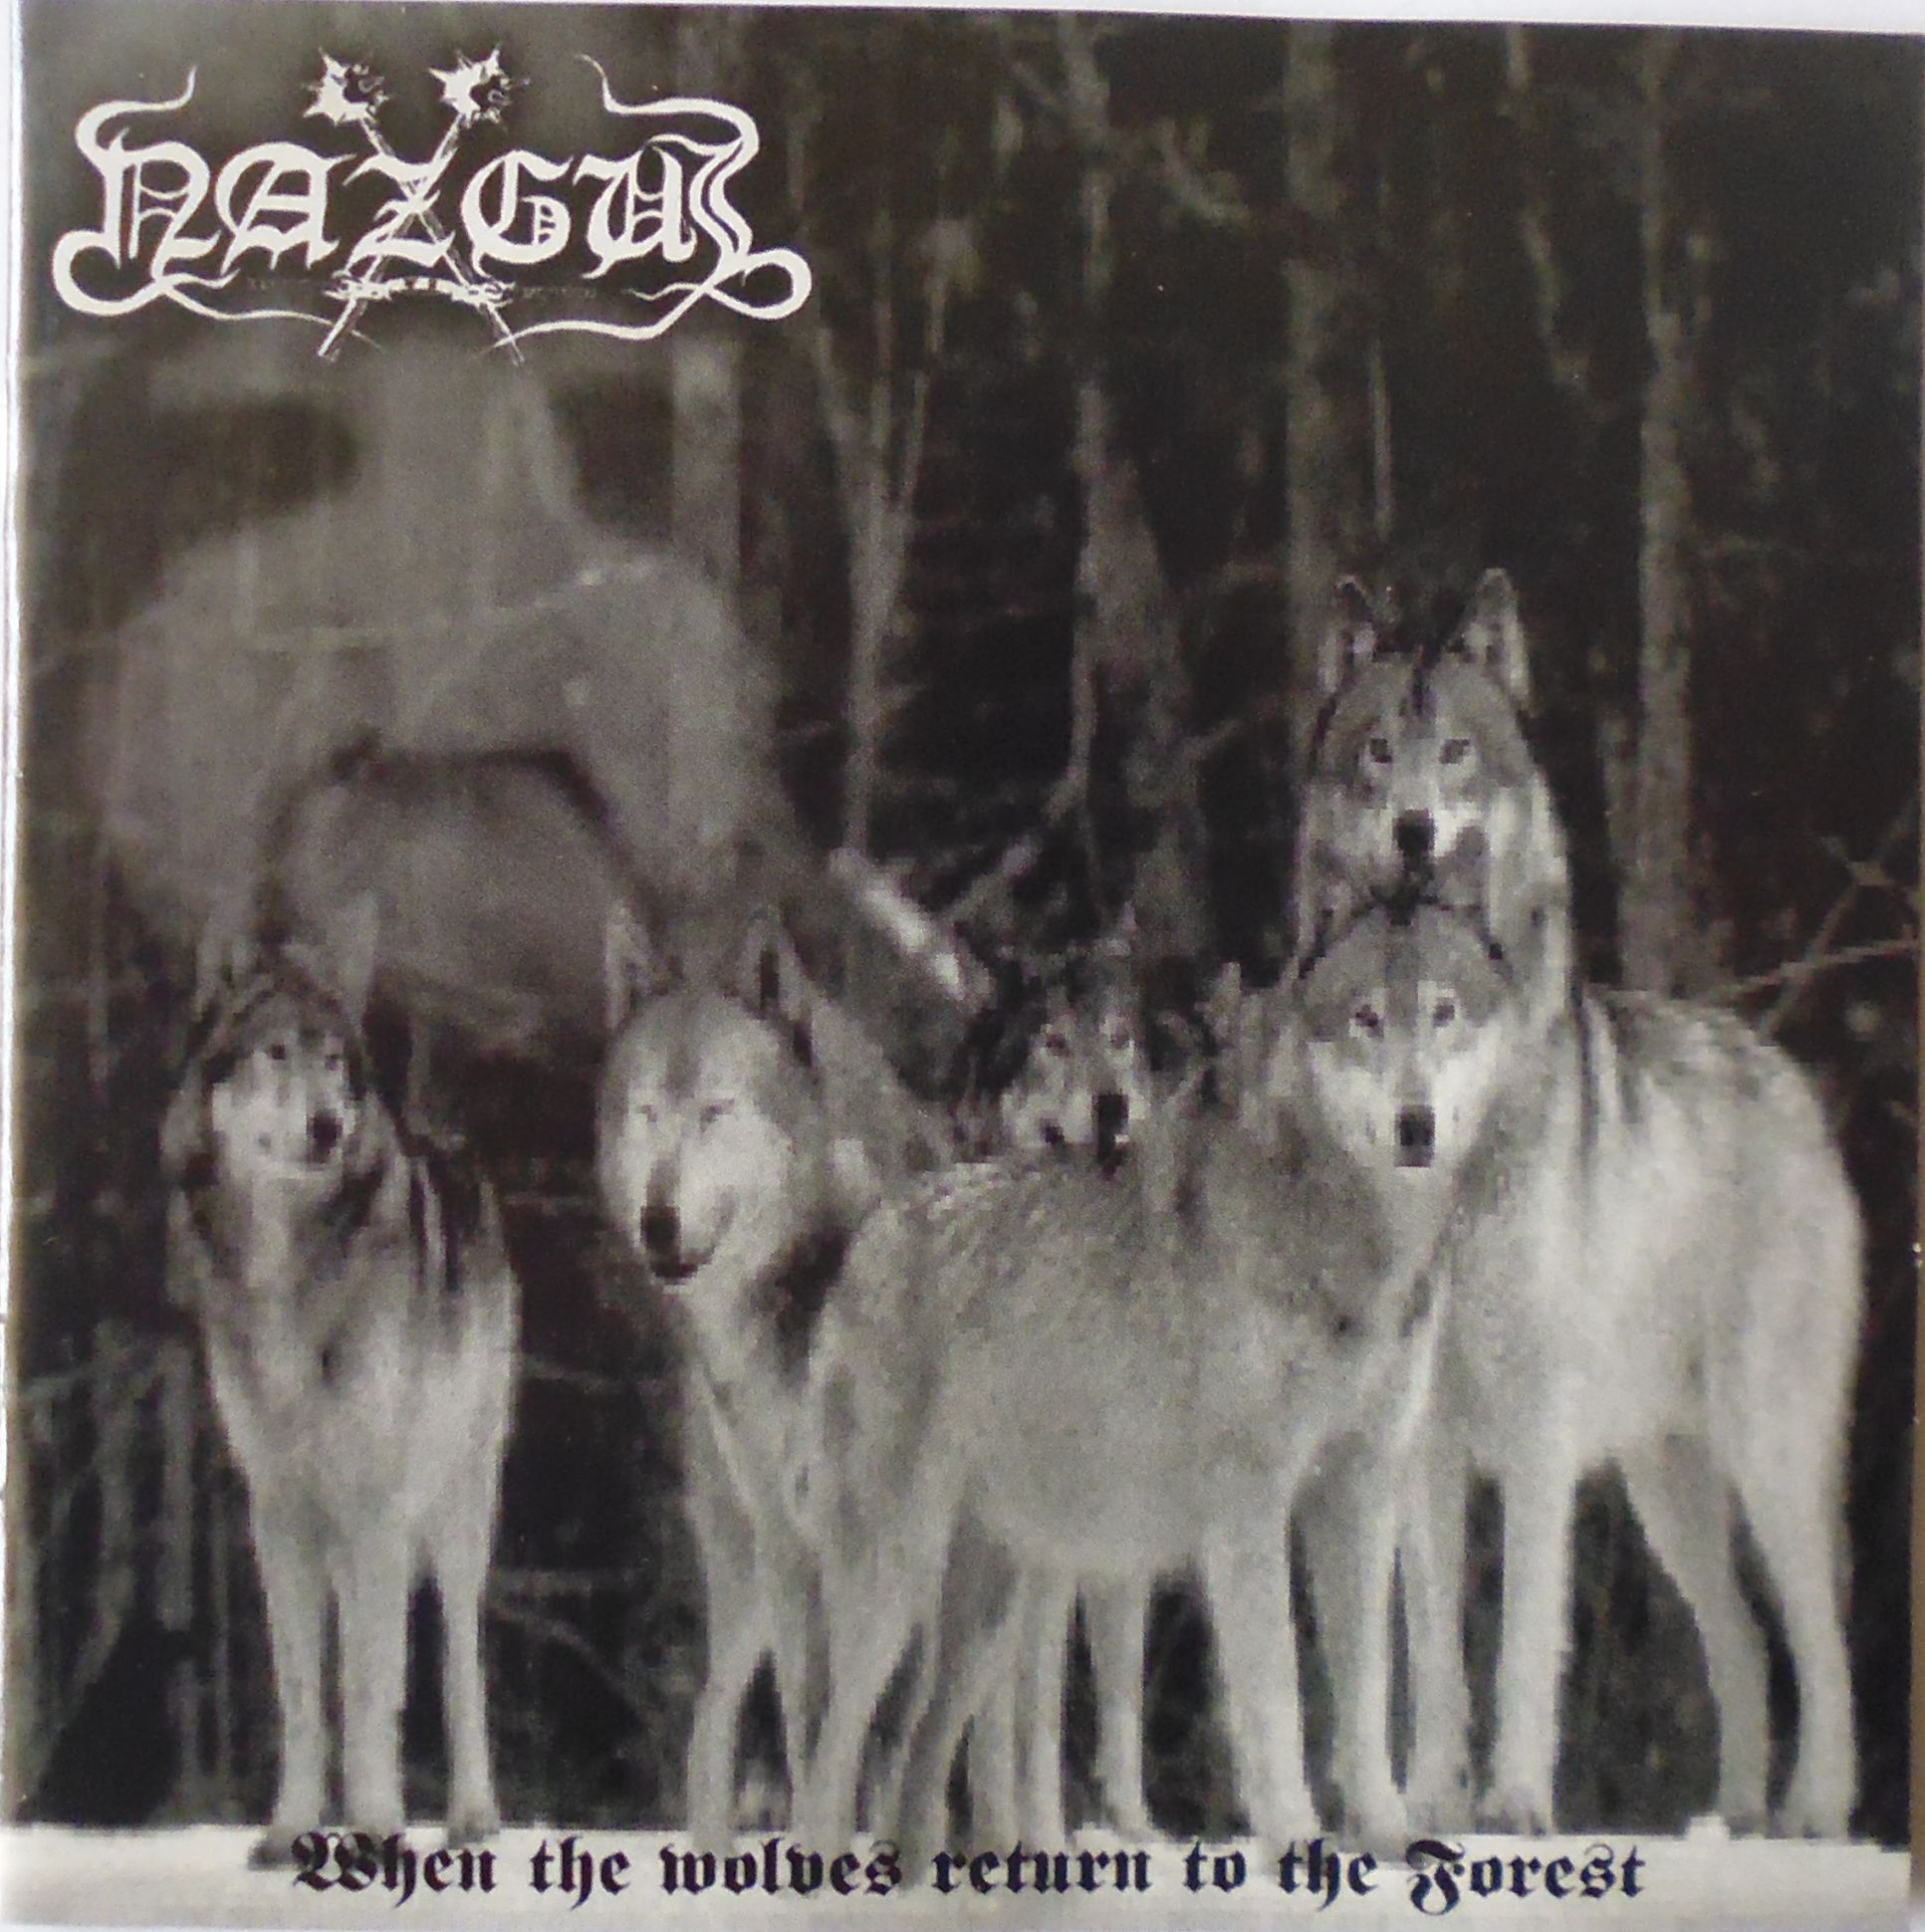 nazgul – when the wolves return to the forest